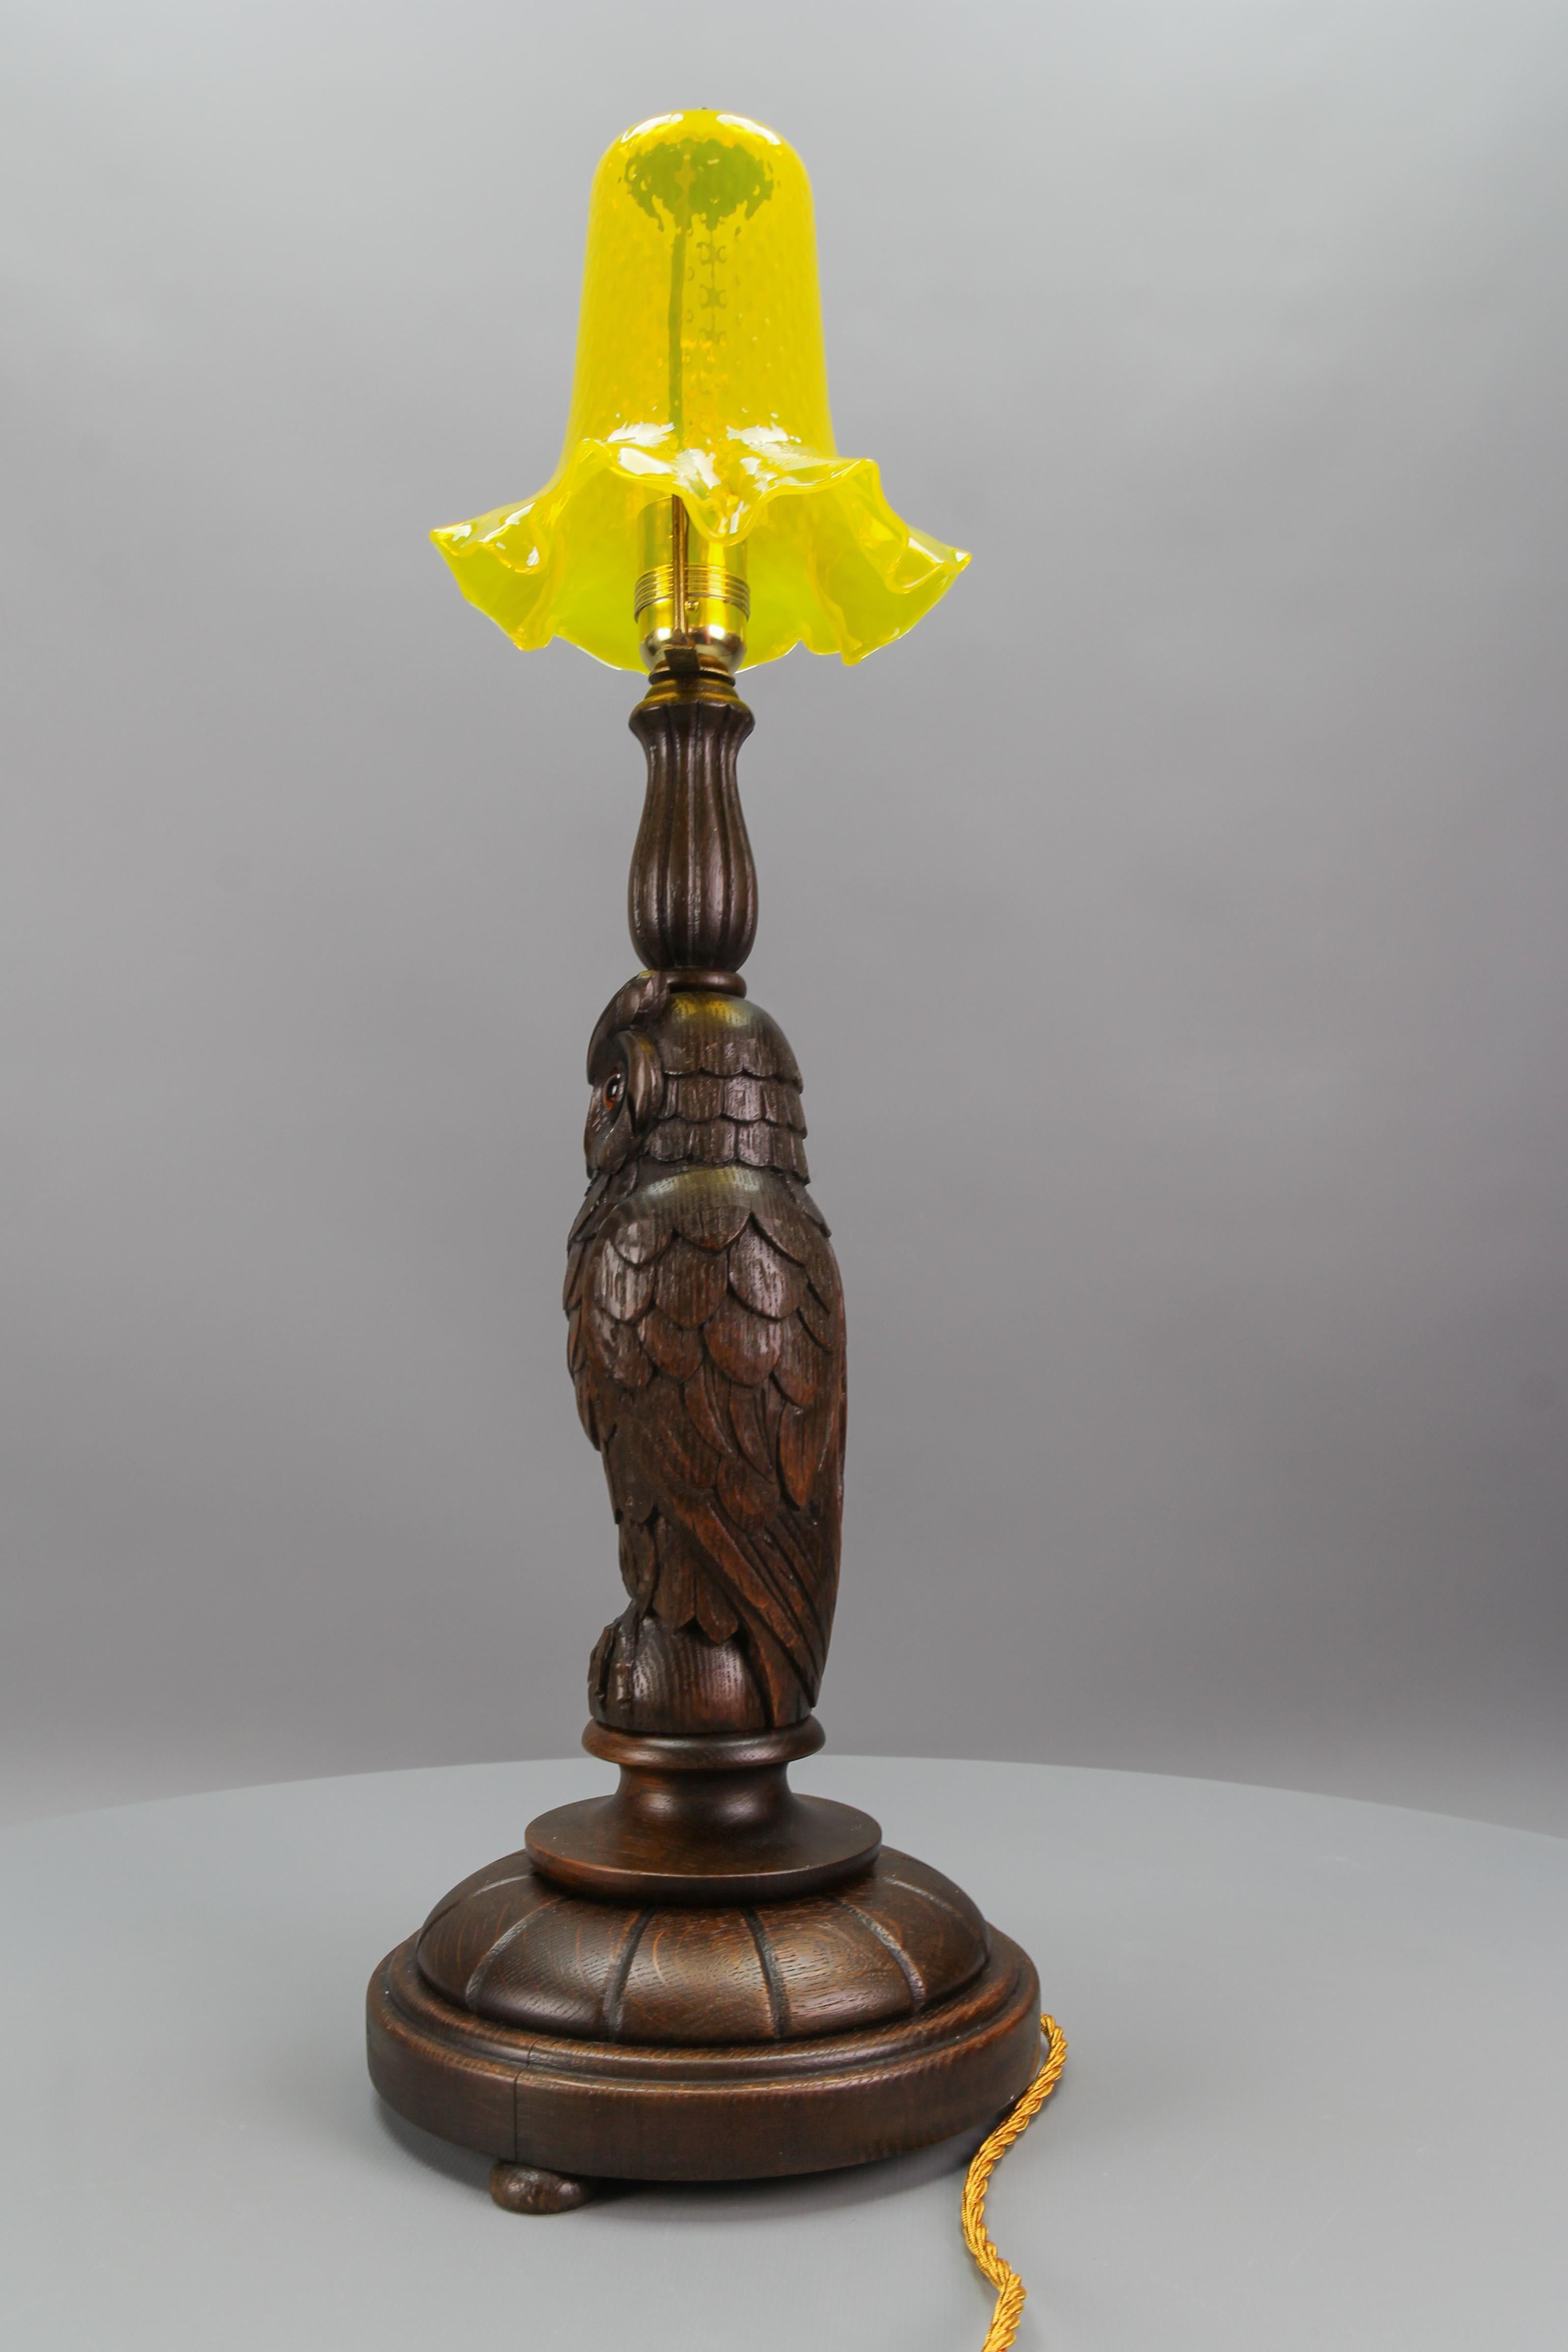 Art Deco Table Lamp with Owl Sculpture and Yellow Glass Lampshade, ca. 1920 For Sale 4